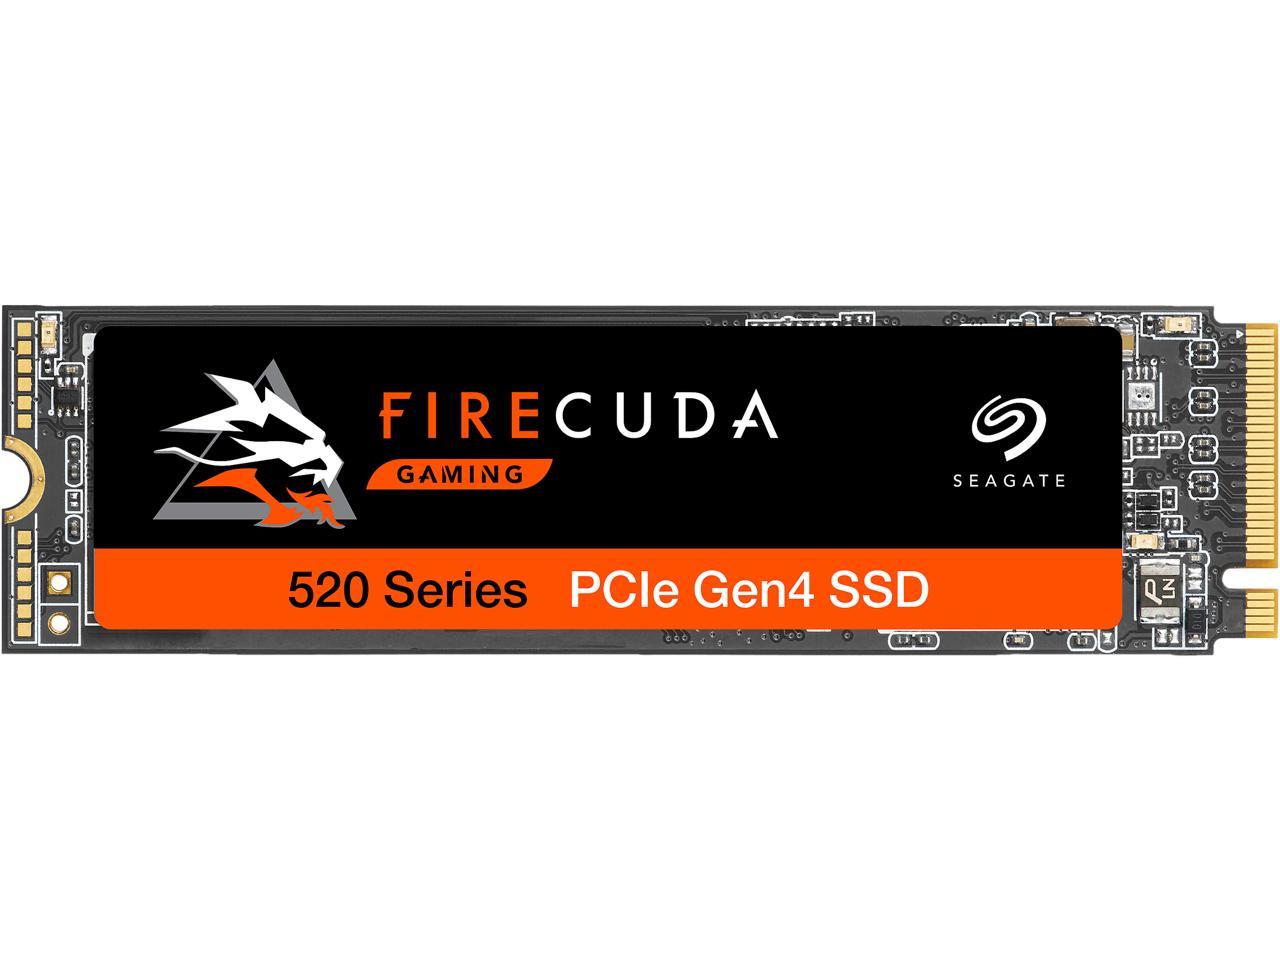 except for brake Play sports Seagate Firecuda 520 1TB Performance Internal Solid State Drive SSD PCIe  Gen4 X4 NVMe 1.3 for Gaming PC Gaming Laptop Desktop - 3-year Rescue  Service (ZP1000GM3A002) - Newegg.com